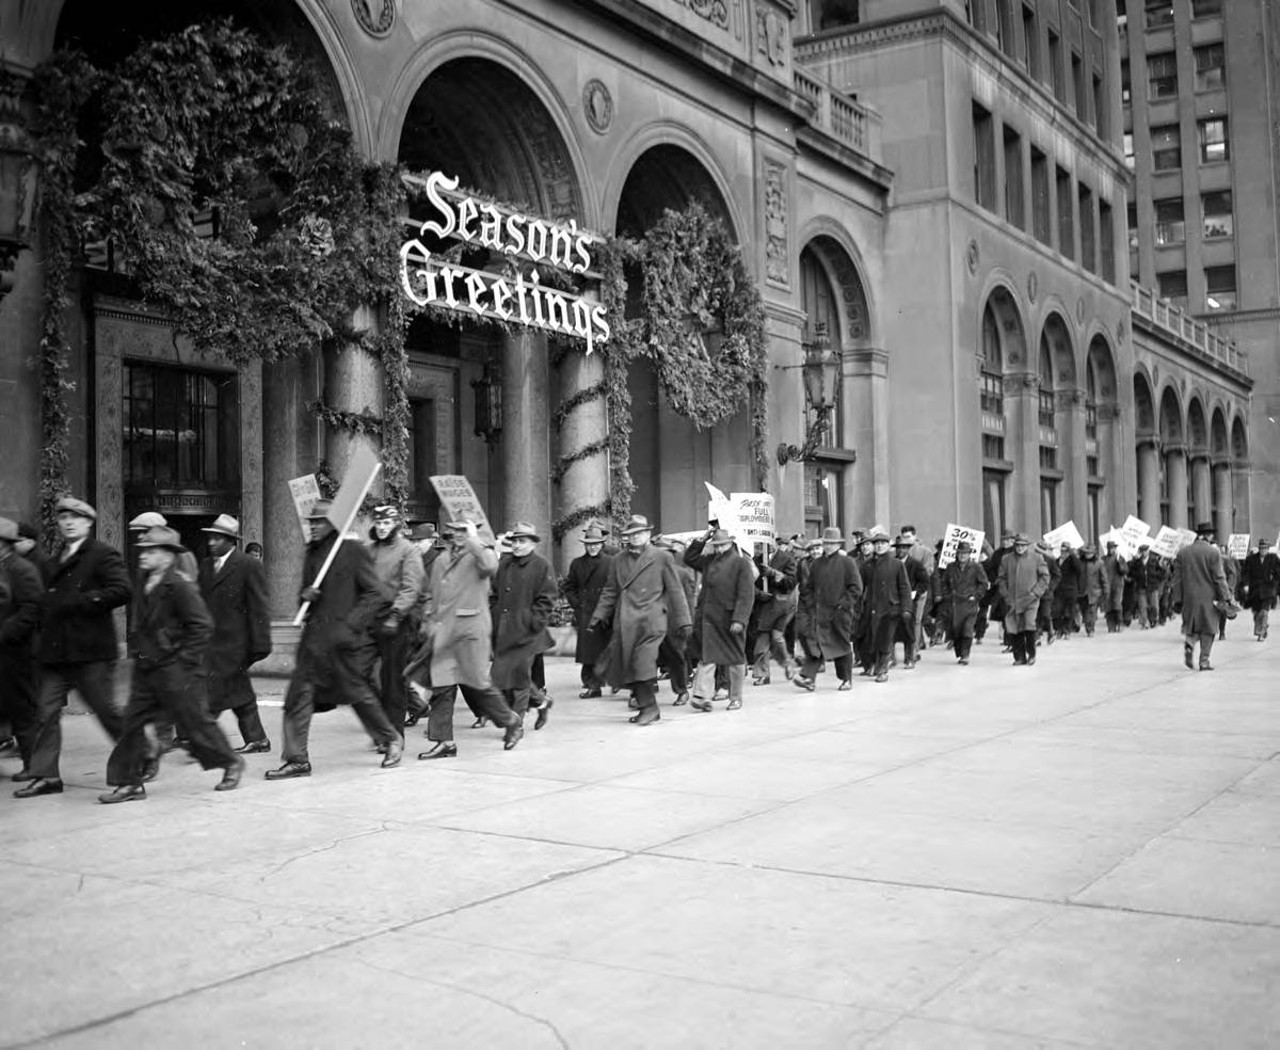 
Dec. 10, 1945: In Detroit, striking UAW members, carrying windblown signs, hunch into their overcoats as they picket in front of the General Motors Building, which is decorated for Christmas.